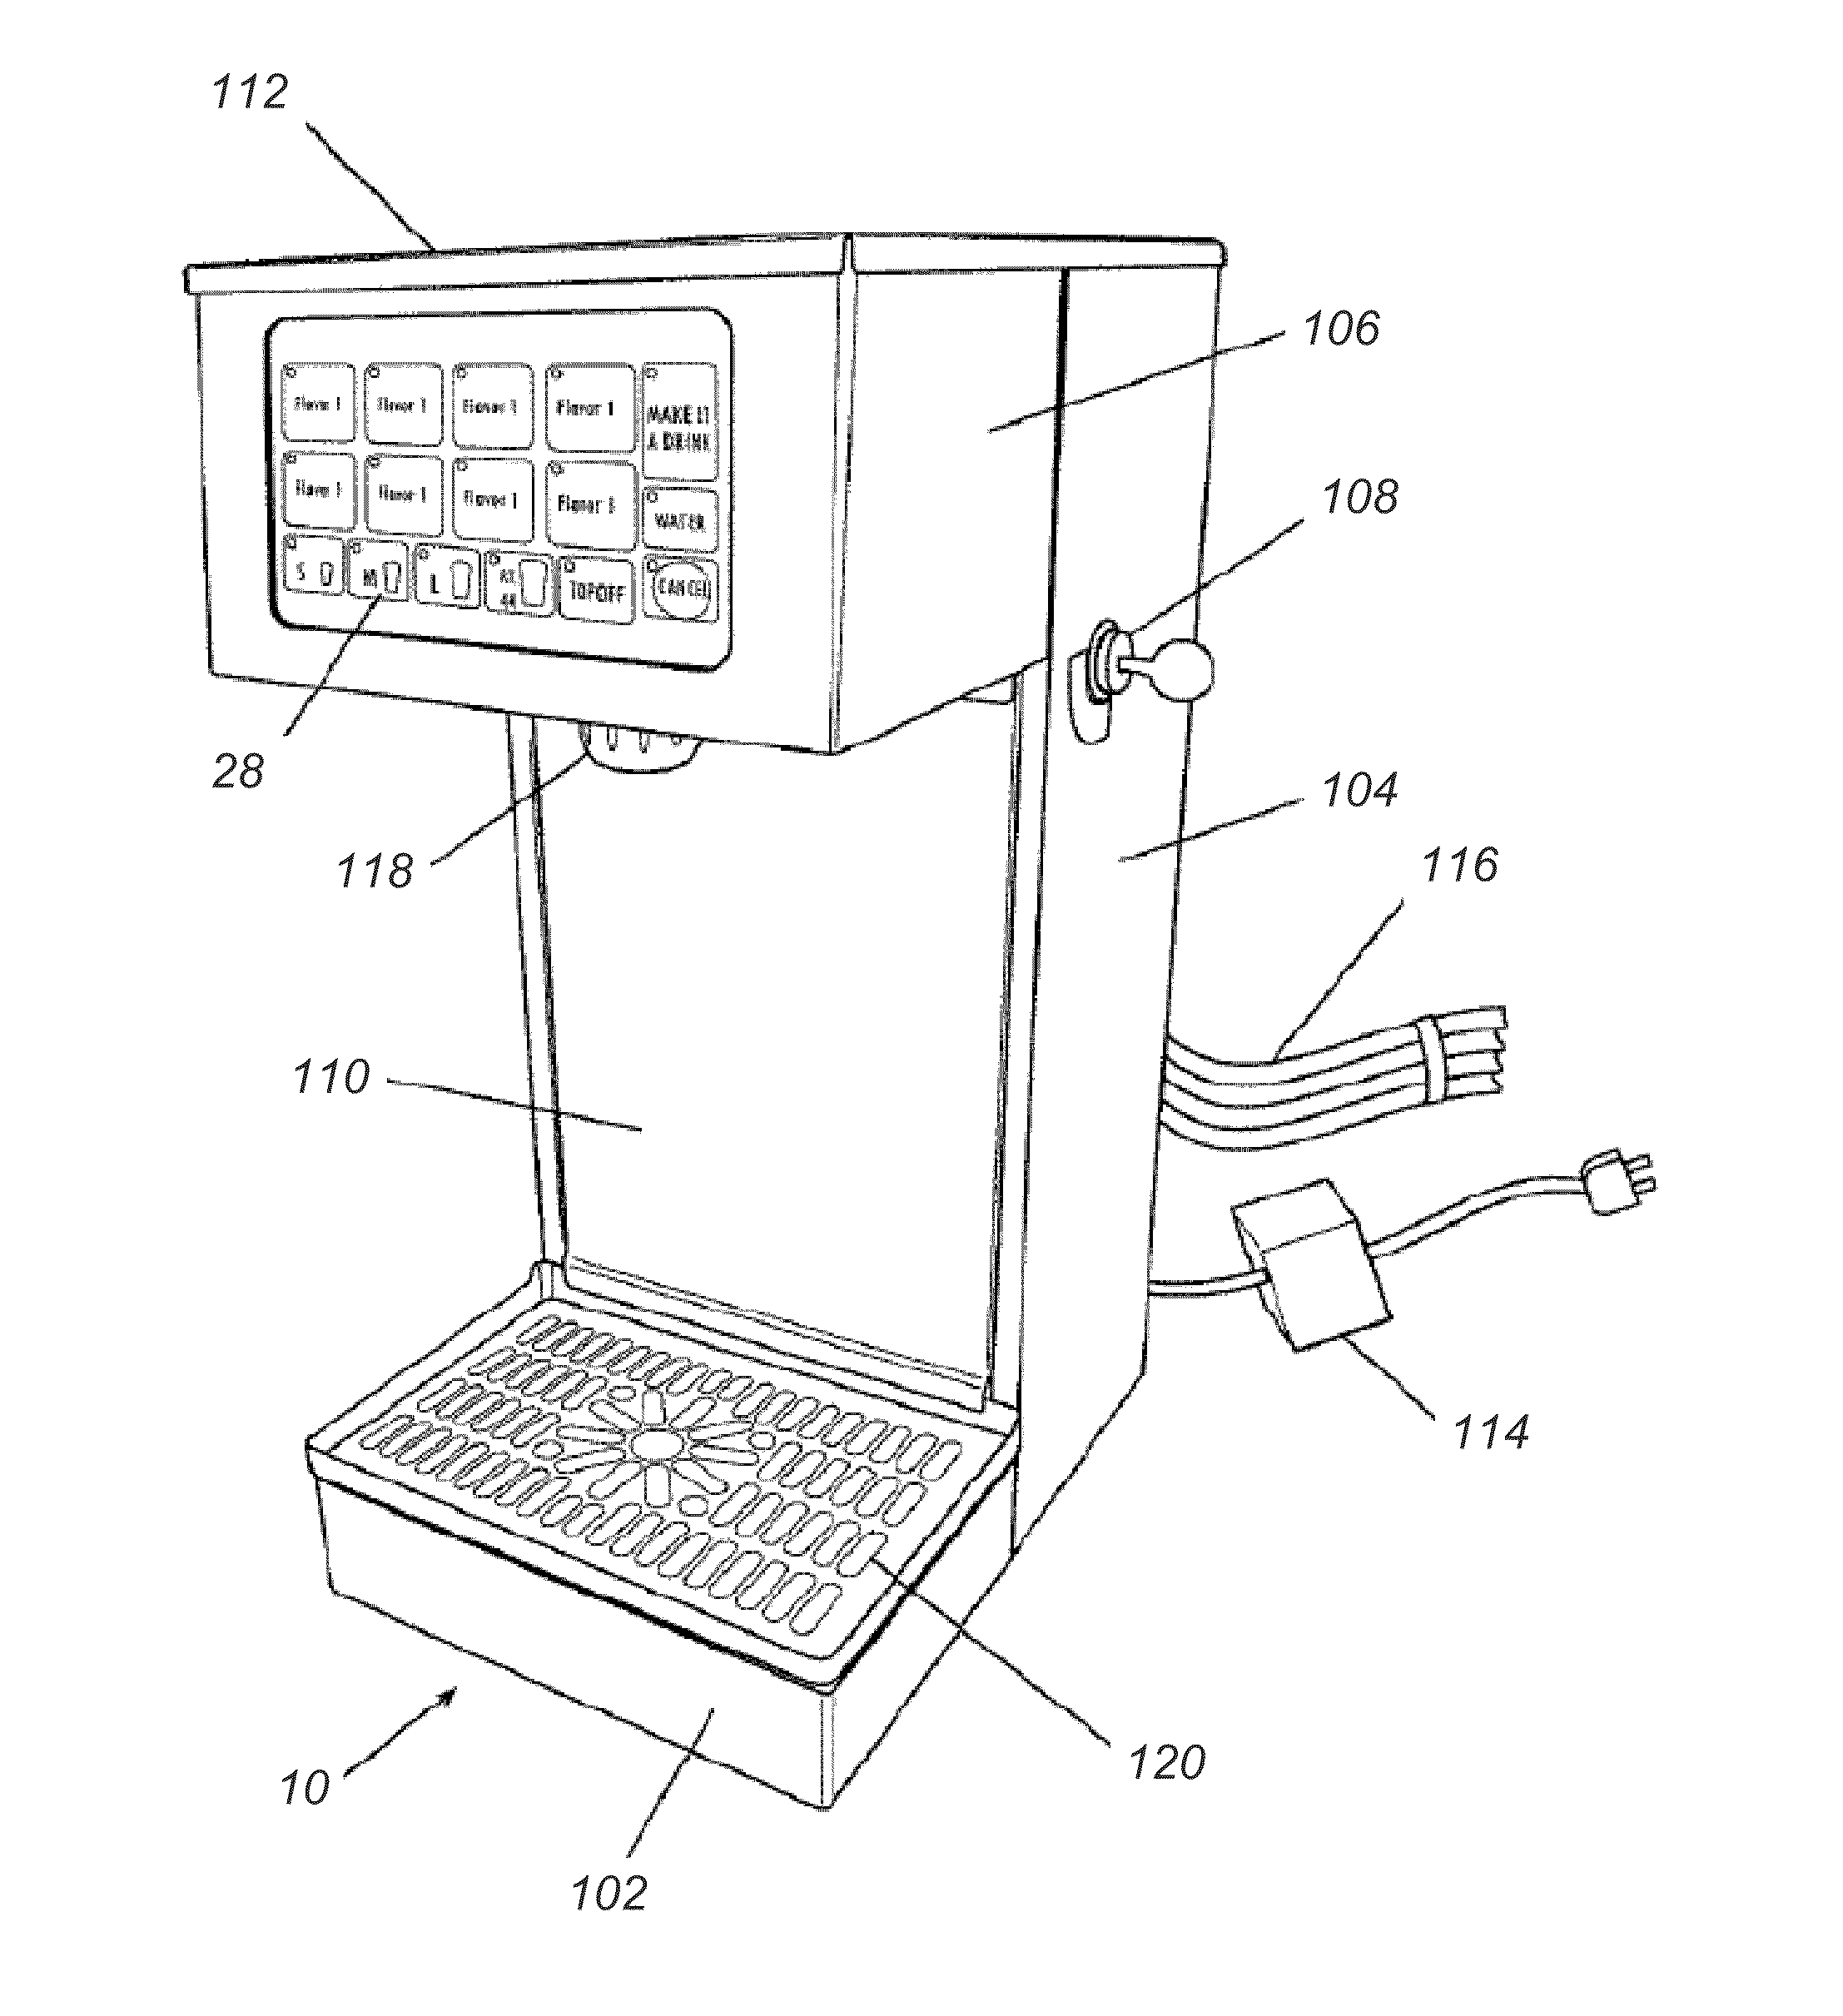 Touch Screen Interface for a Beverage Dispensing Machine